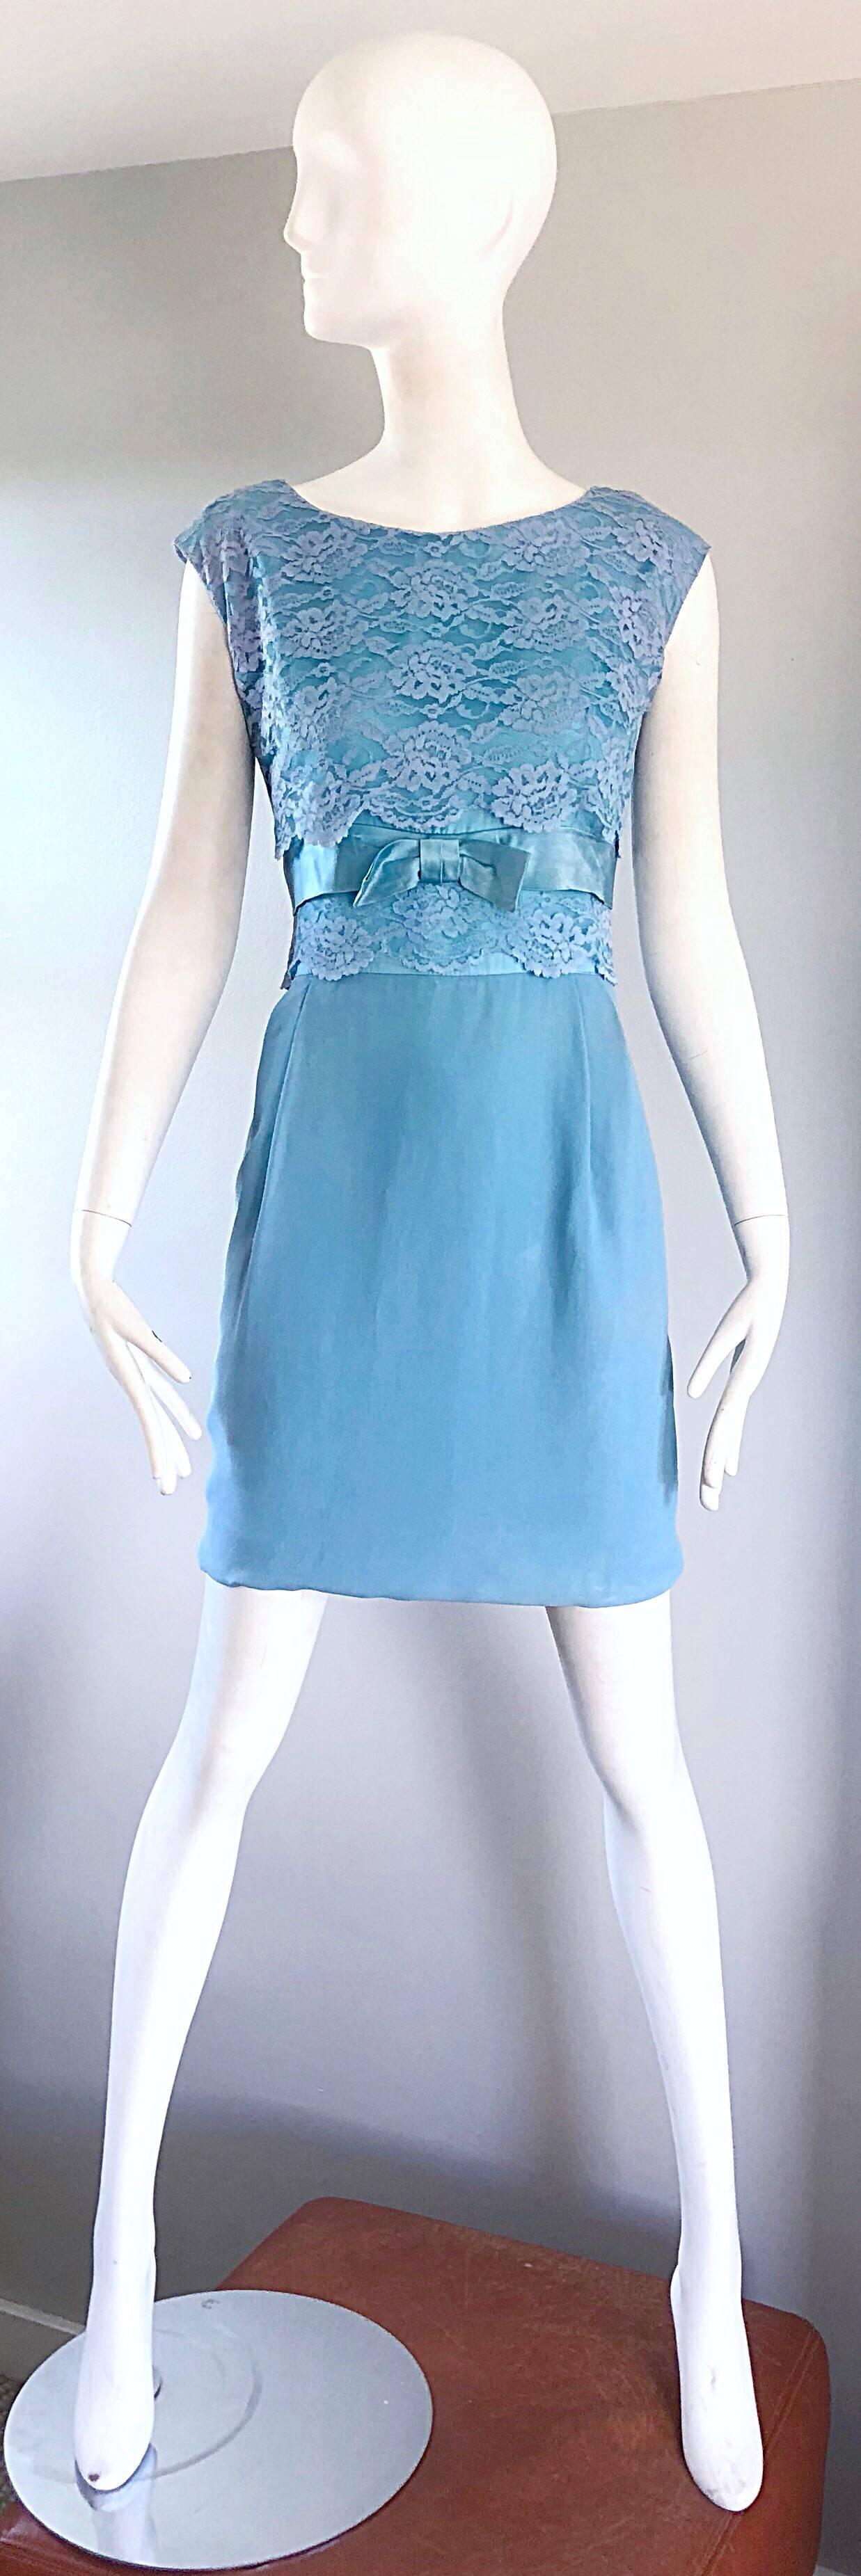 Chic beautiful 1960s pale blue lace + crepe + silk mini shift dress. Features a fitted bodice, with a lace overlay. Great fit, with an amazing amount of attention to detail! Full metal zipper up th eback with hook-and-eye closure. Great for any day